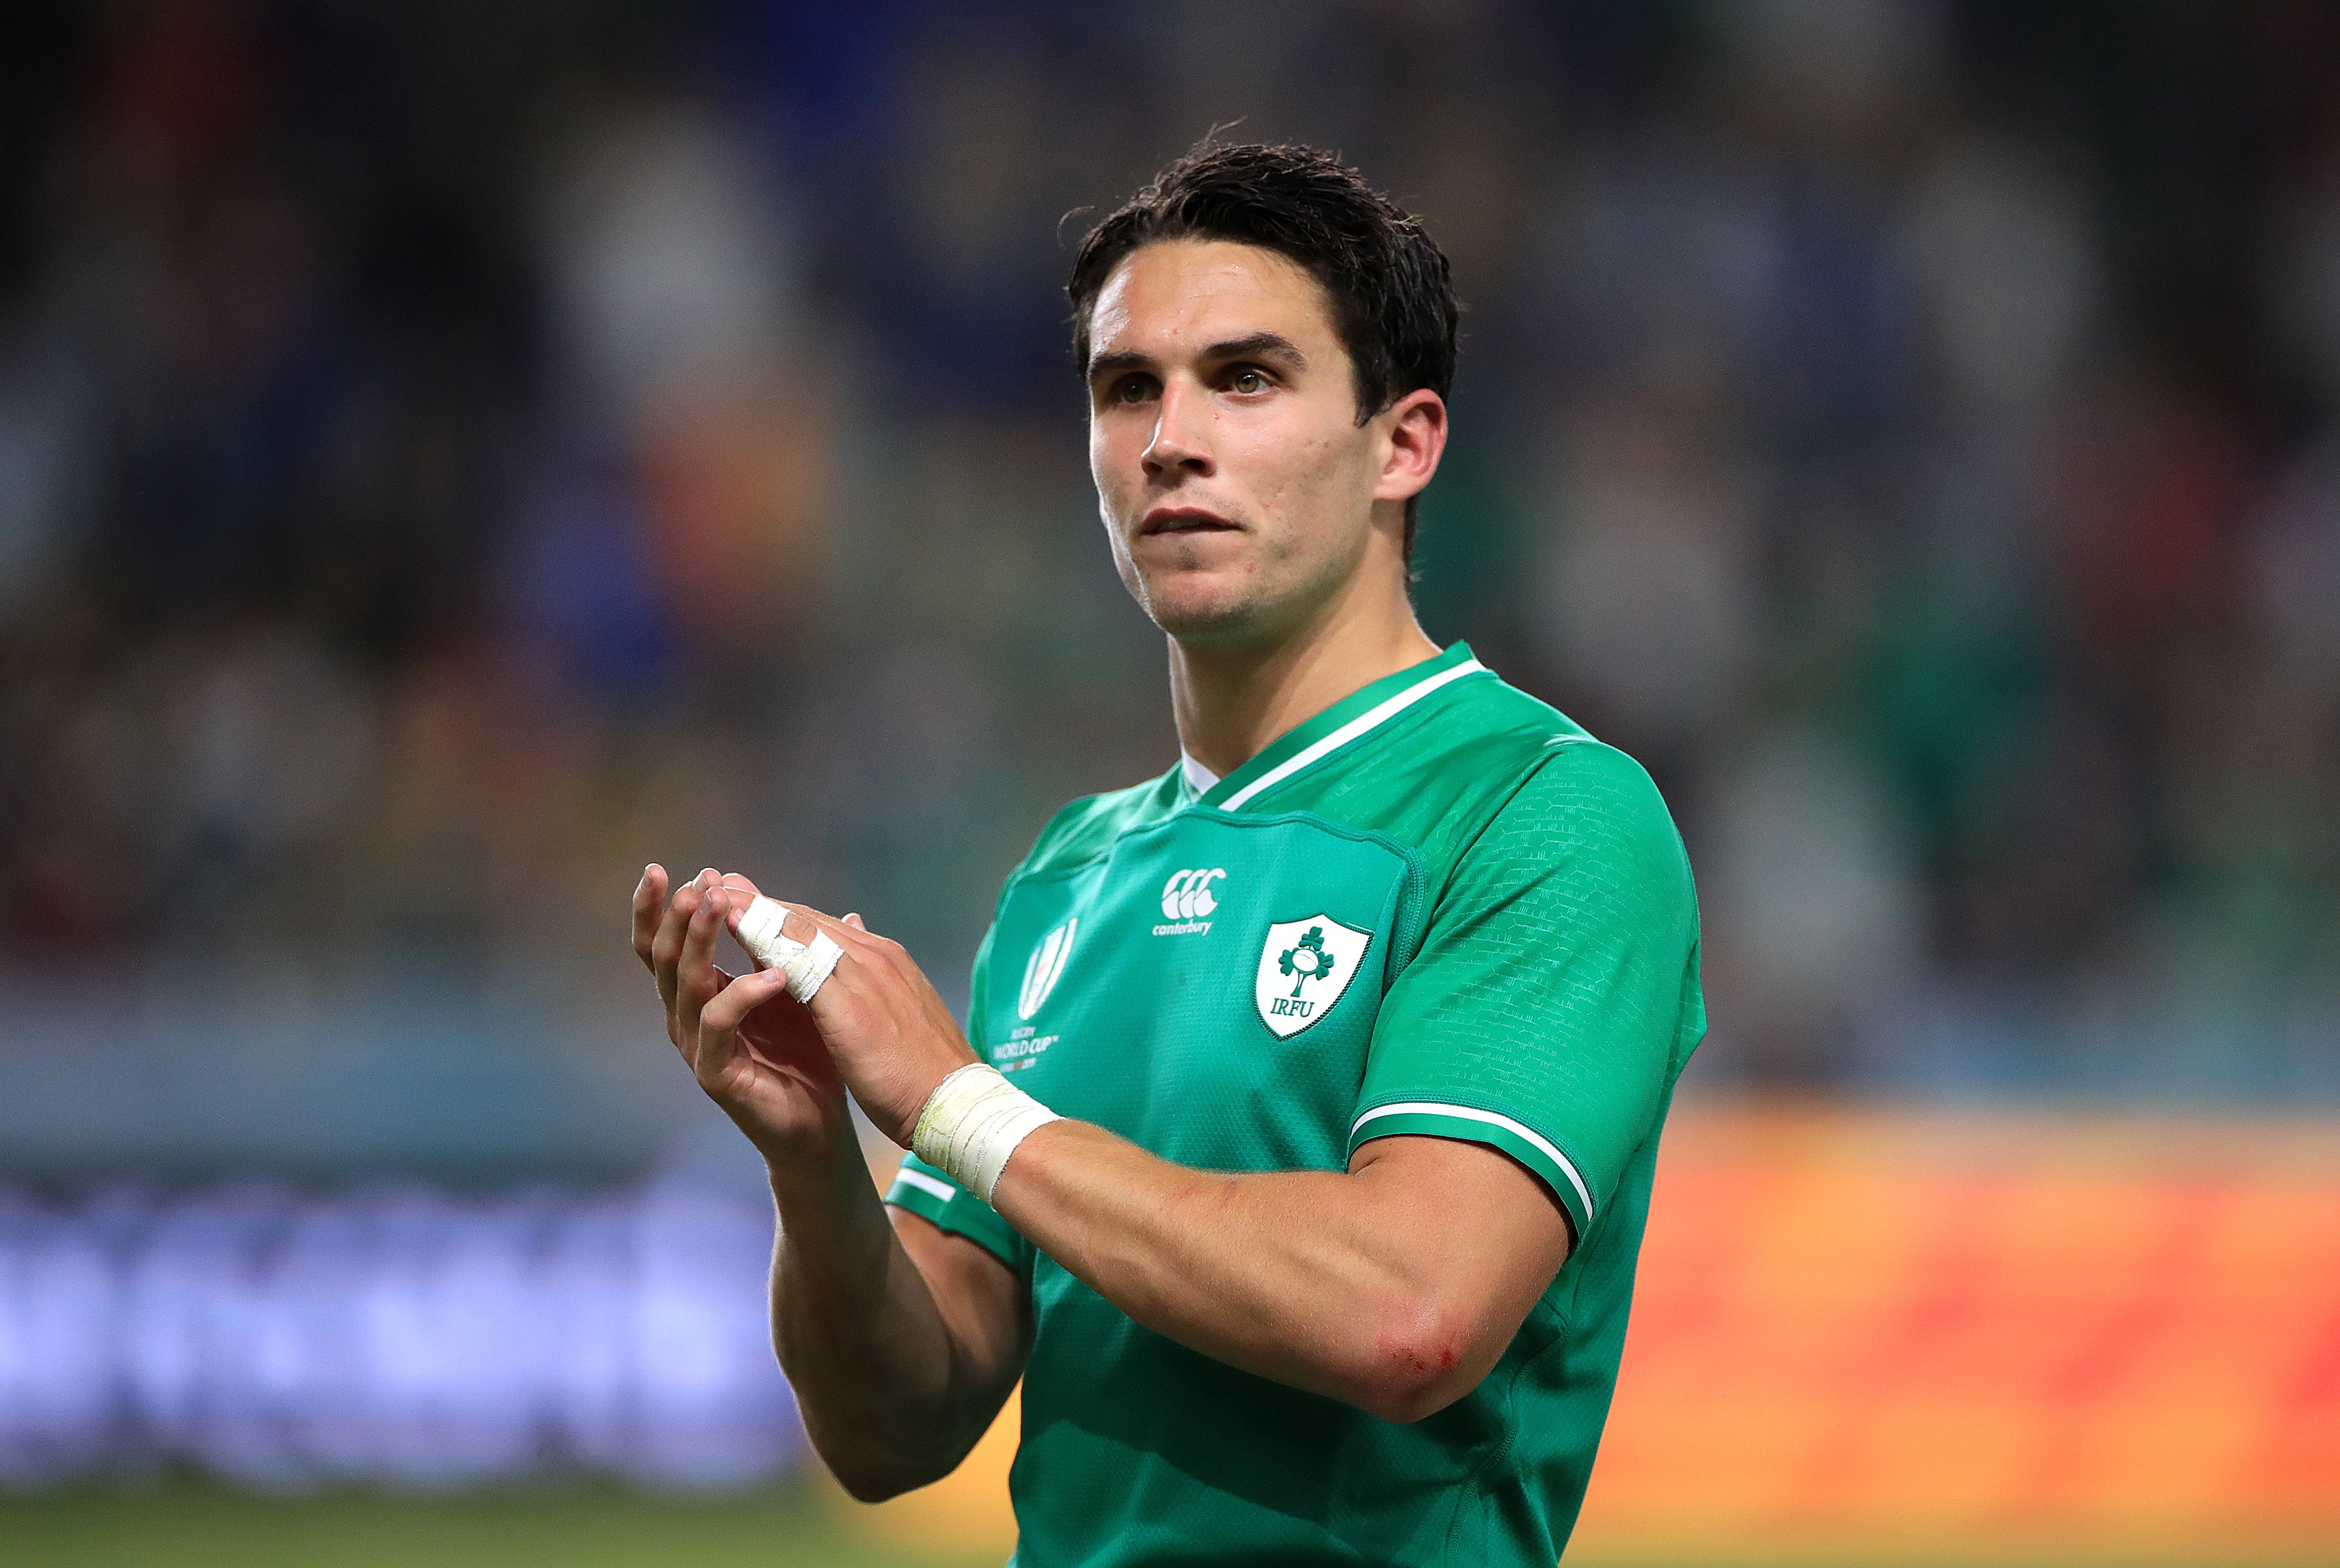 Ireland’s Joey Carbery could make his first international appearance since the 2019 World Cup